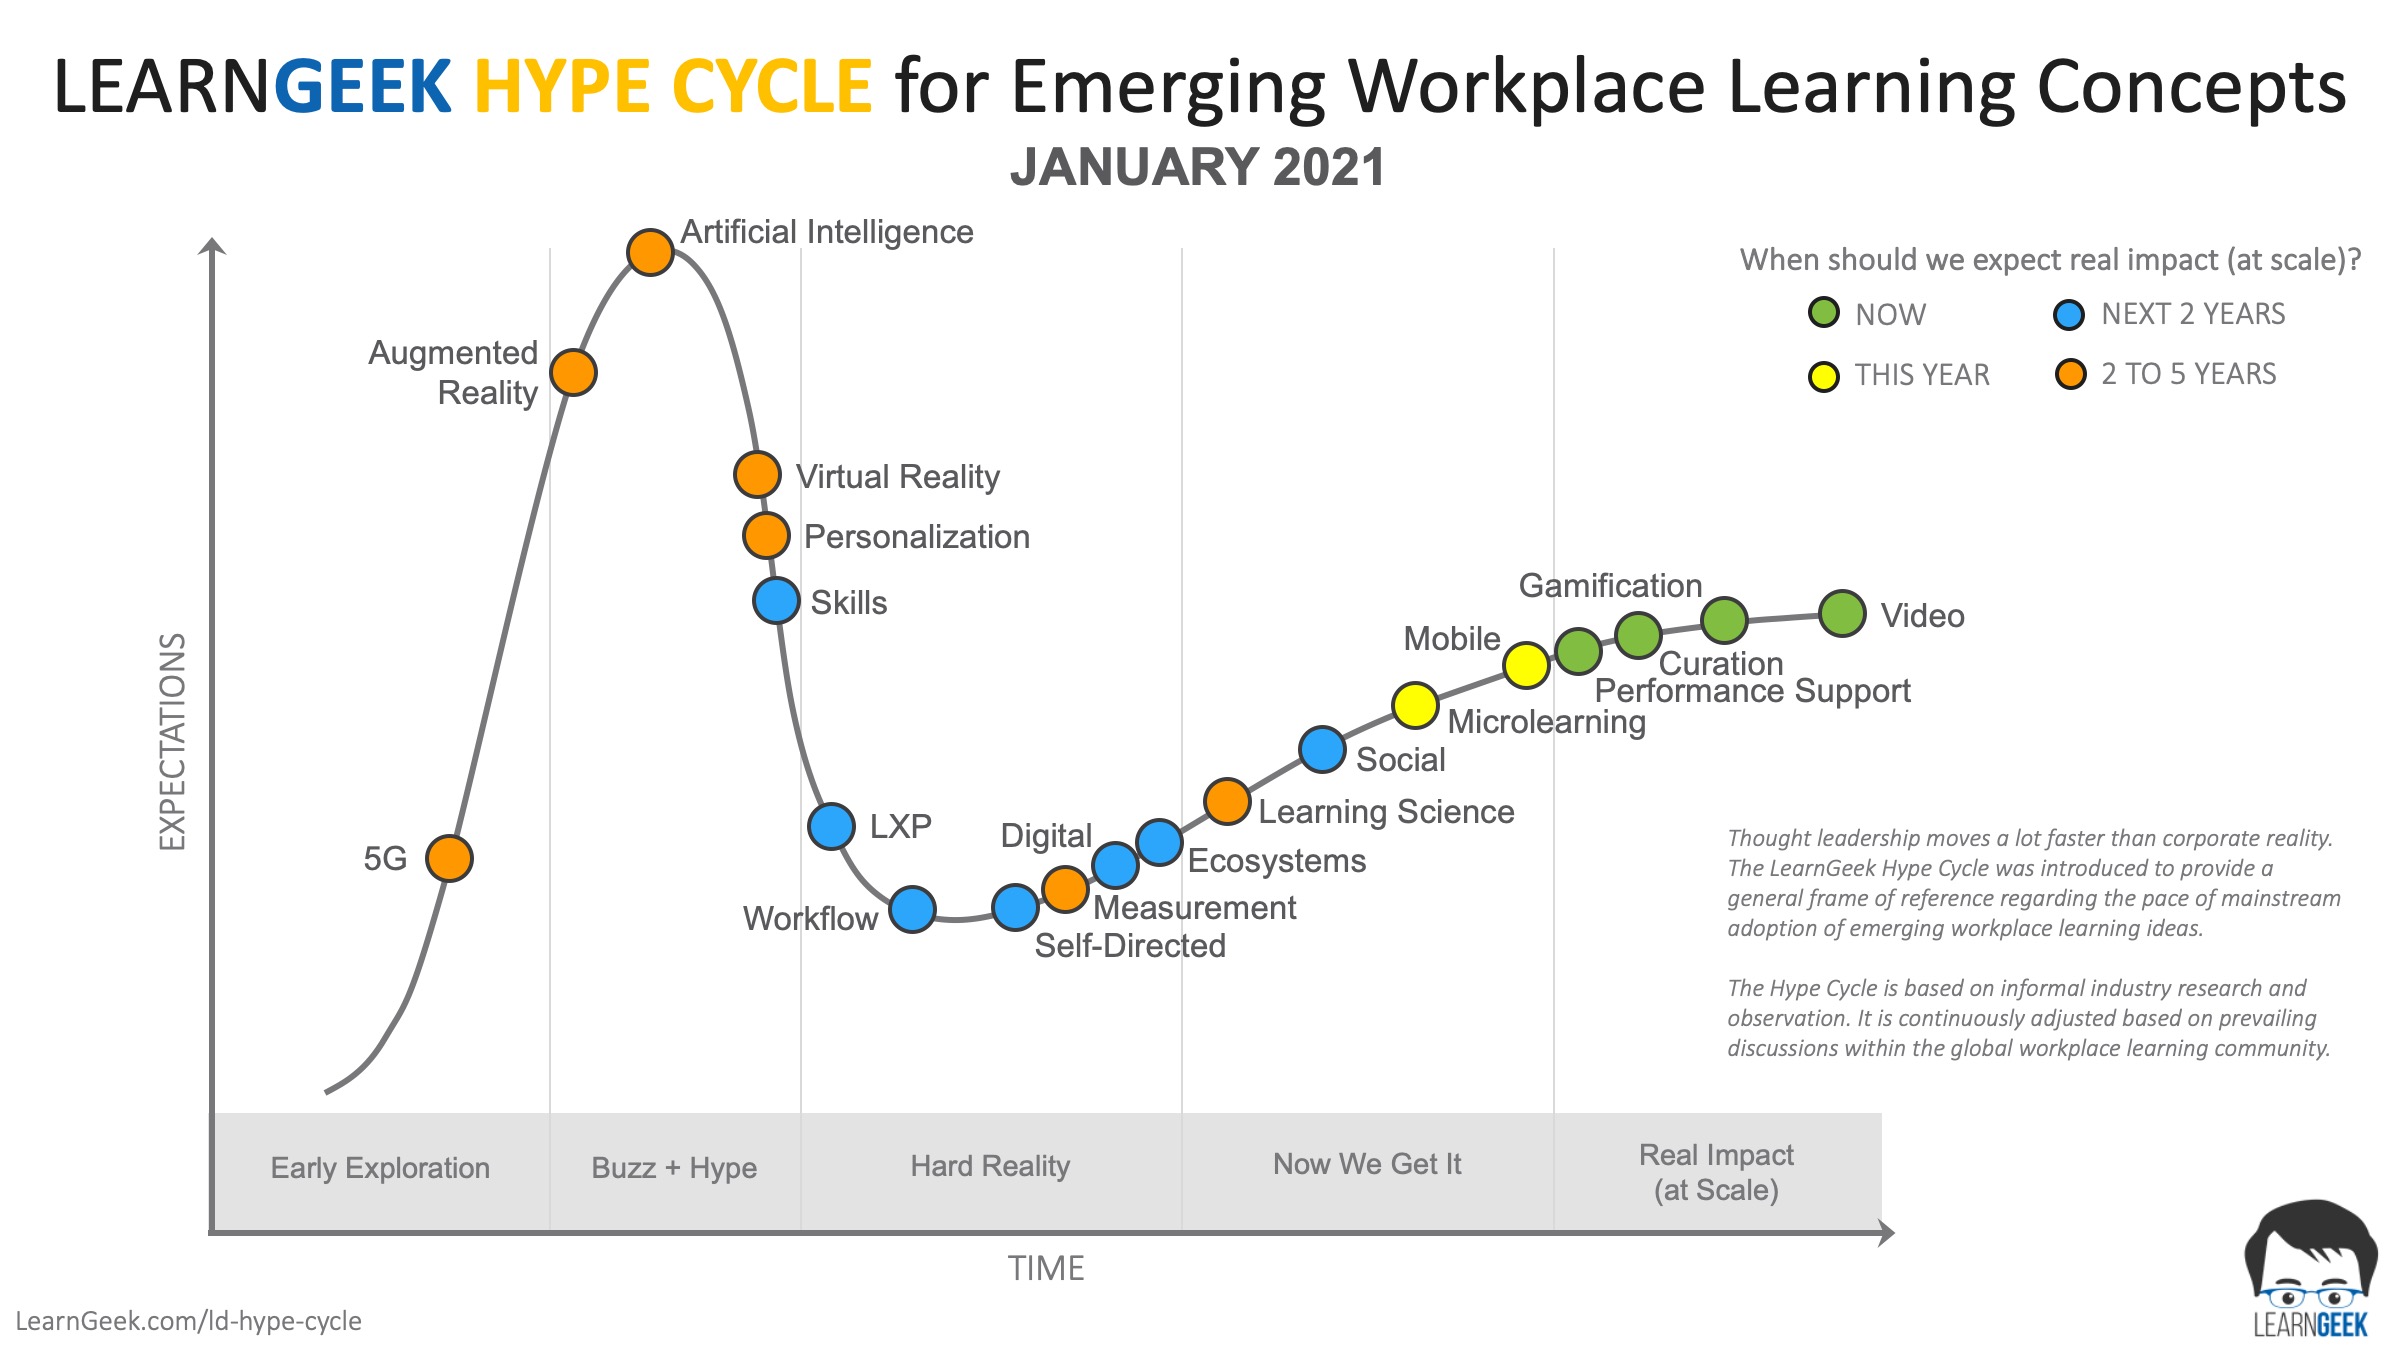 gartner hype cycle for artificial intelligence 2021